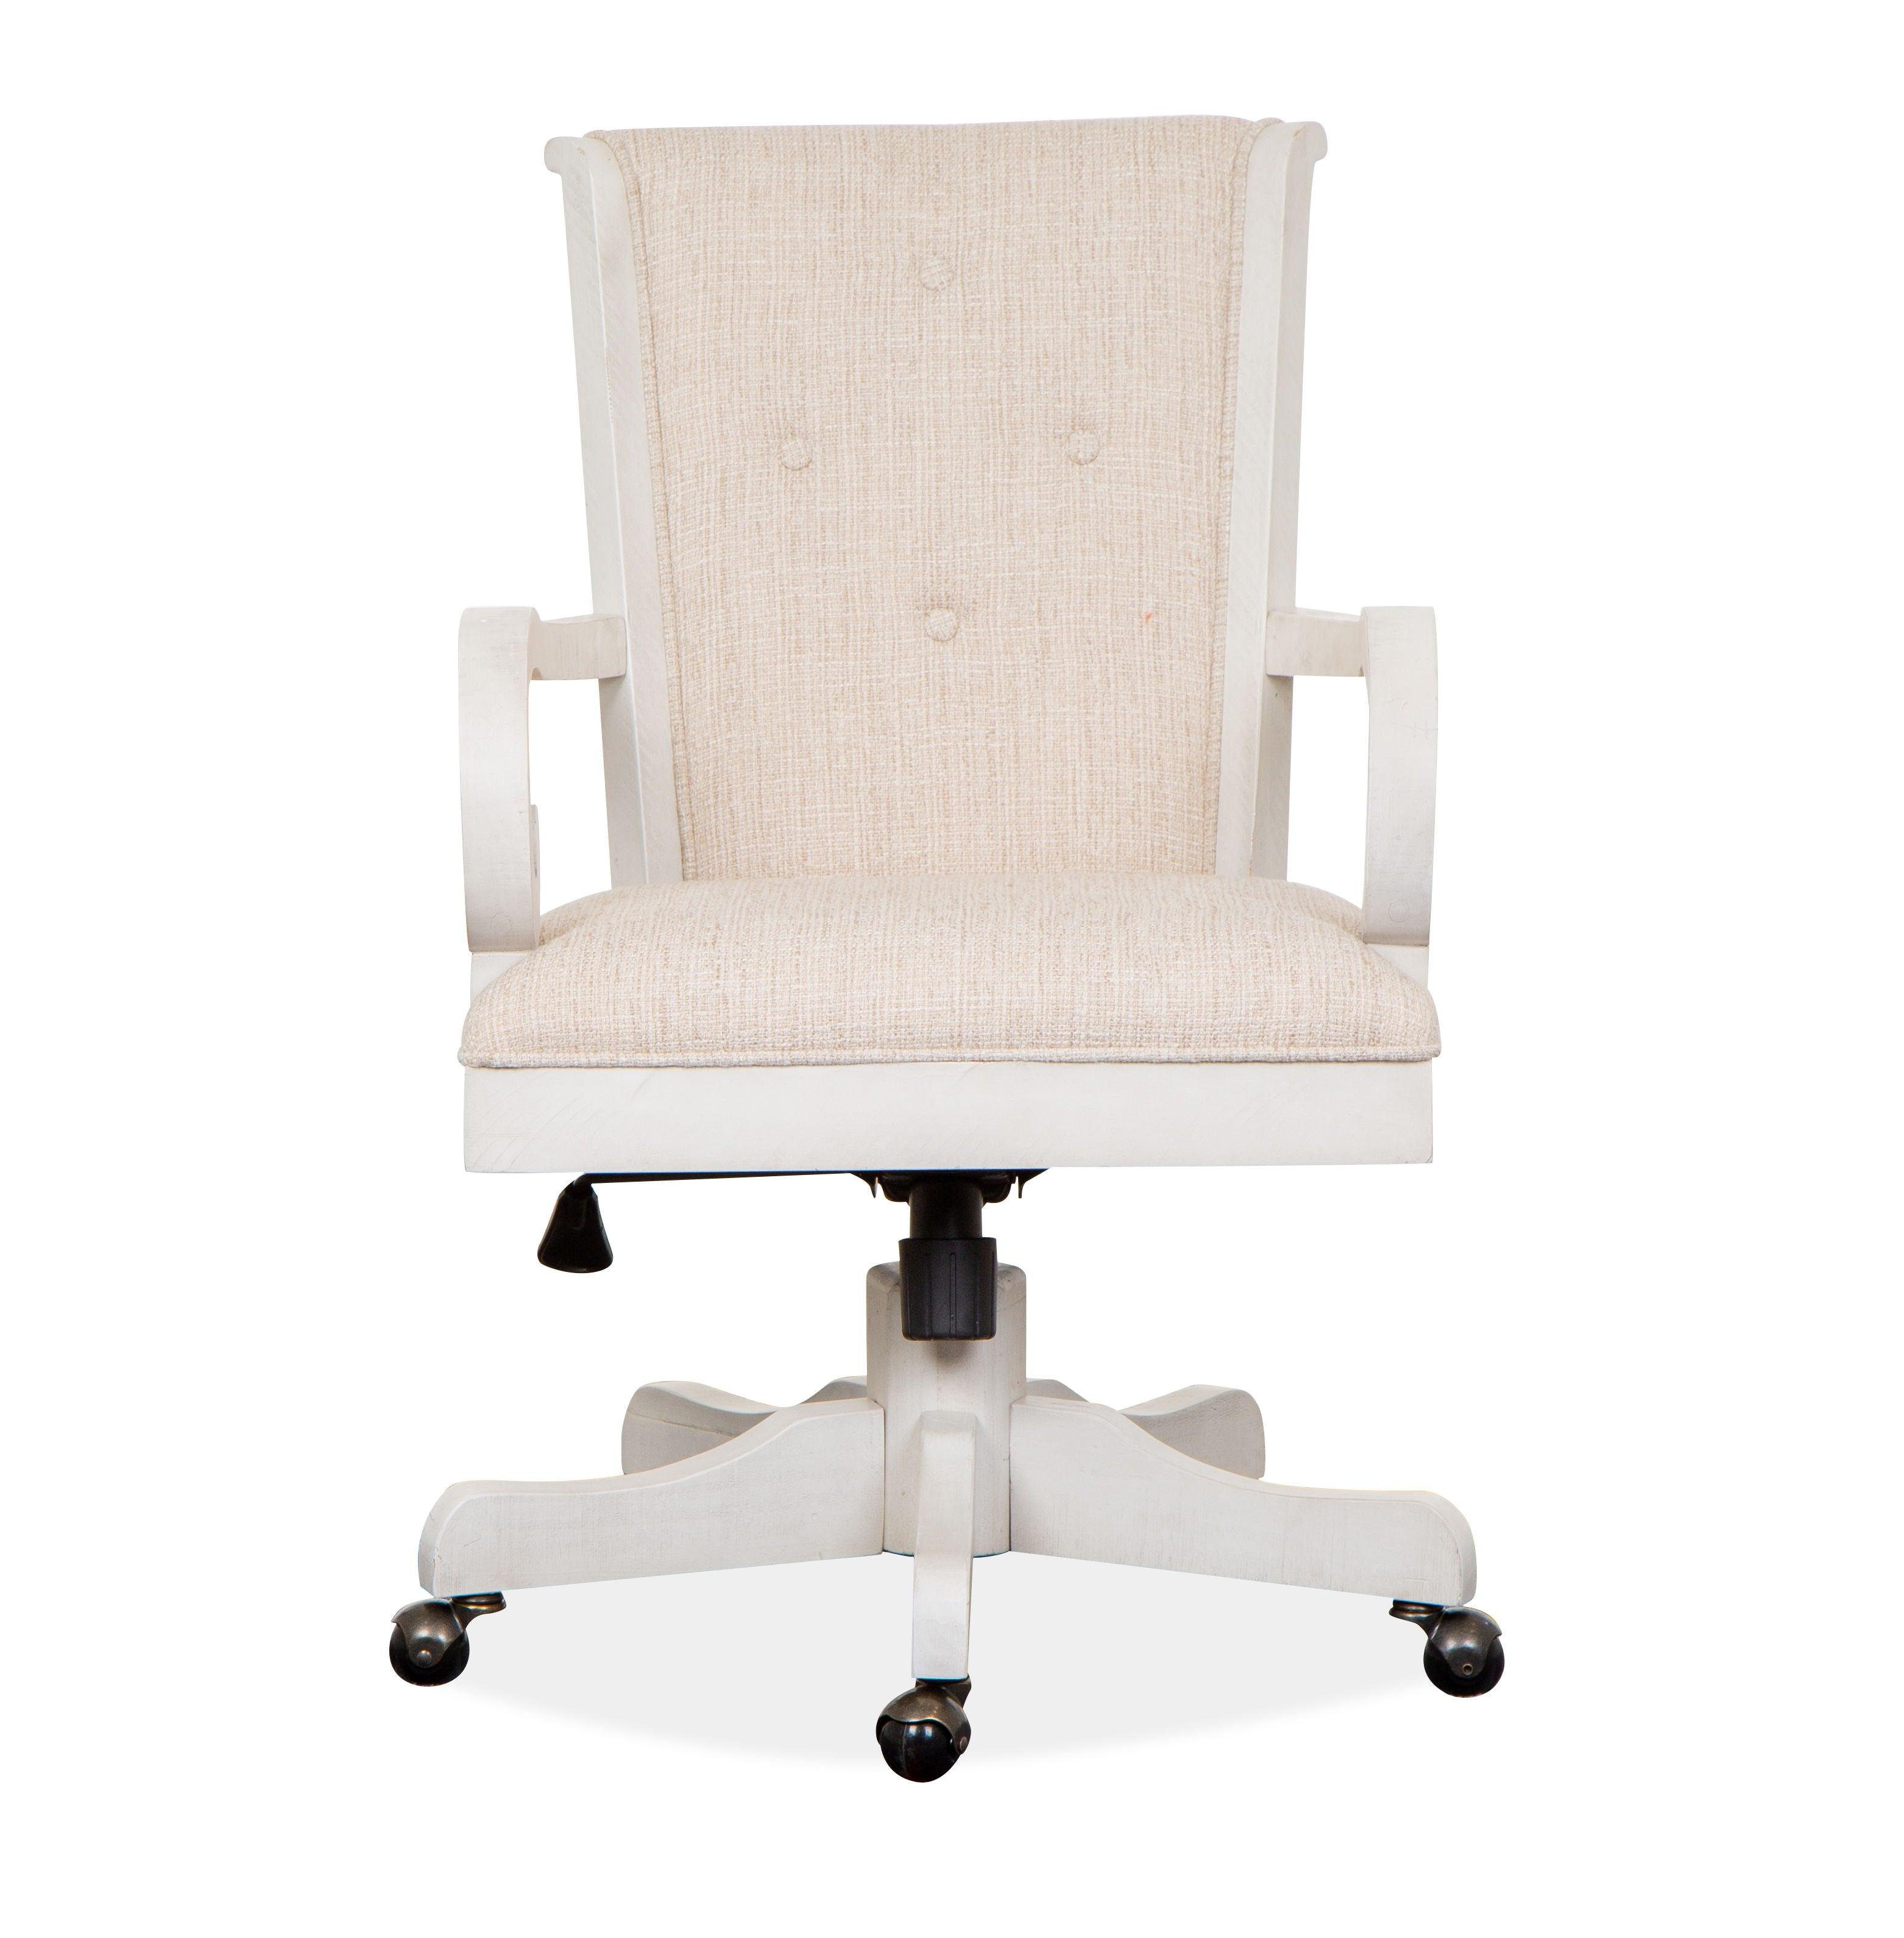 Magnussen Furniture - Bronwyn - Fully Upholstered Swivel Chair - Alabaster - 5th Avenue Furniture